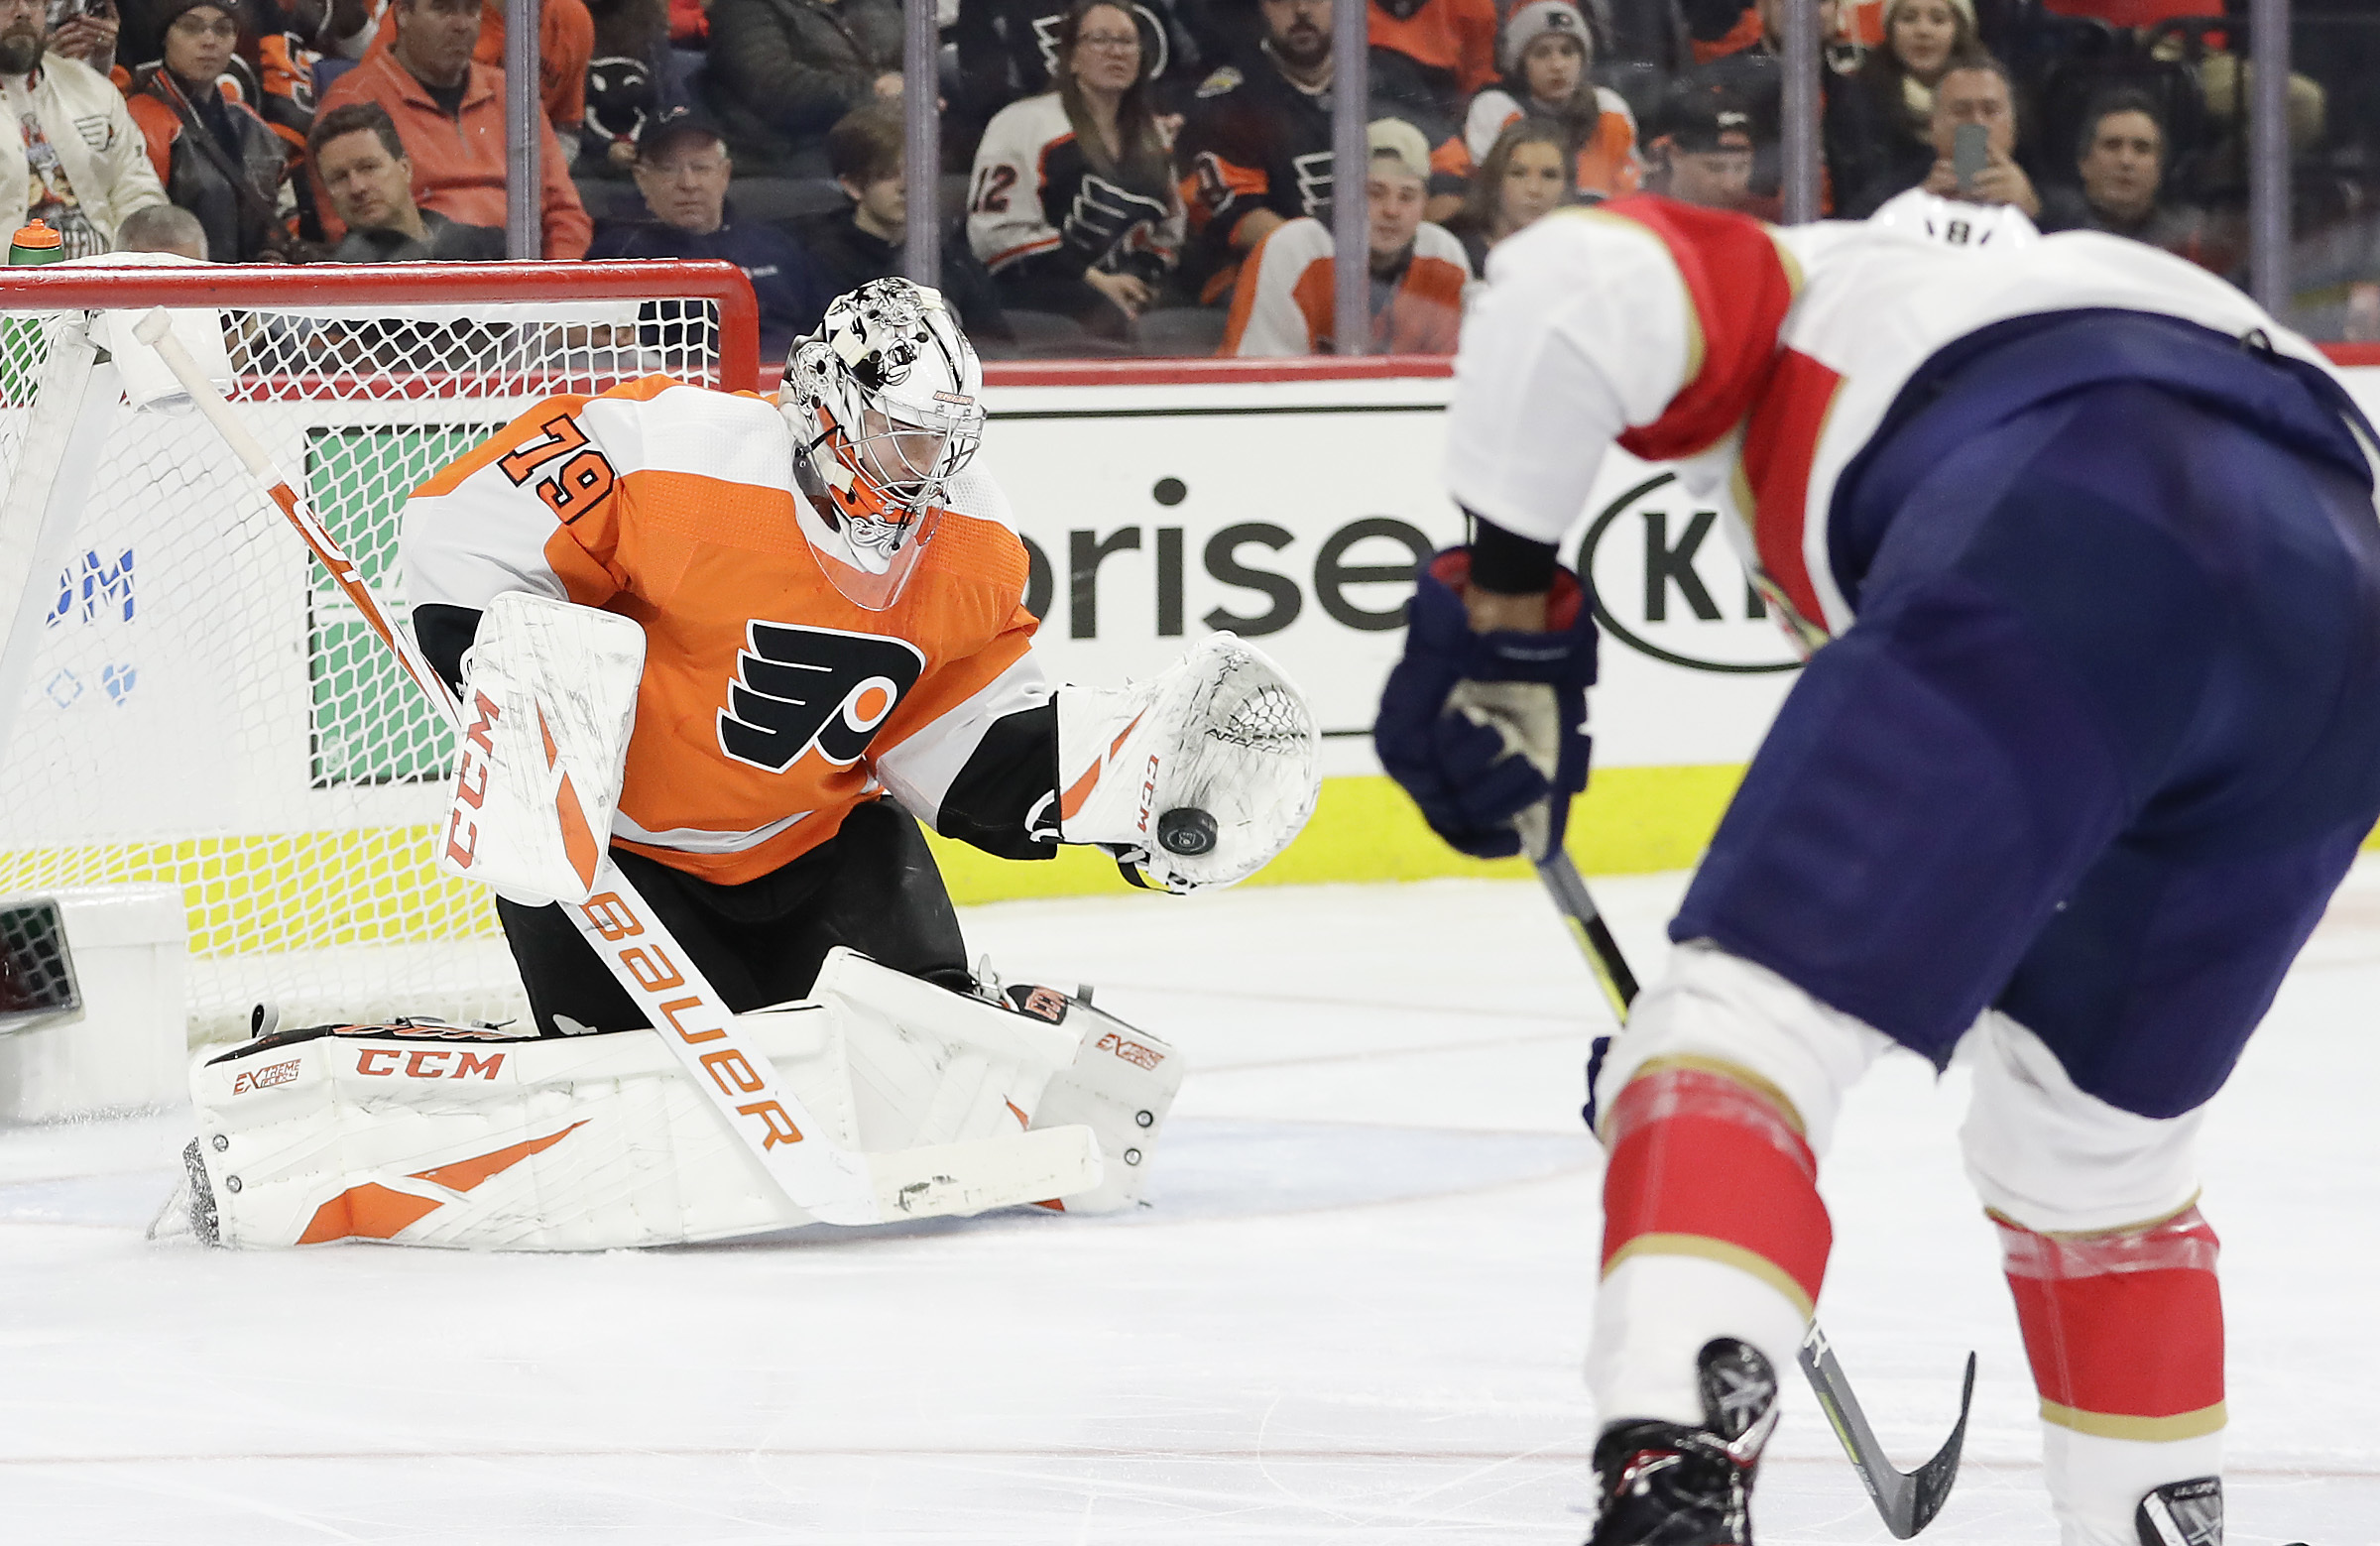 Undefeated goalie Carter Hart 'has been a key' to the Flyers